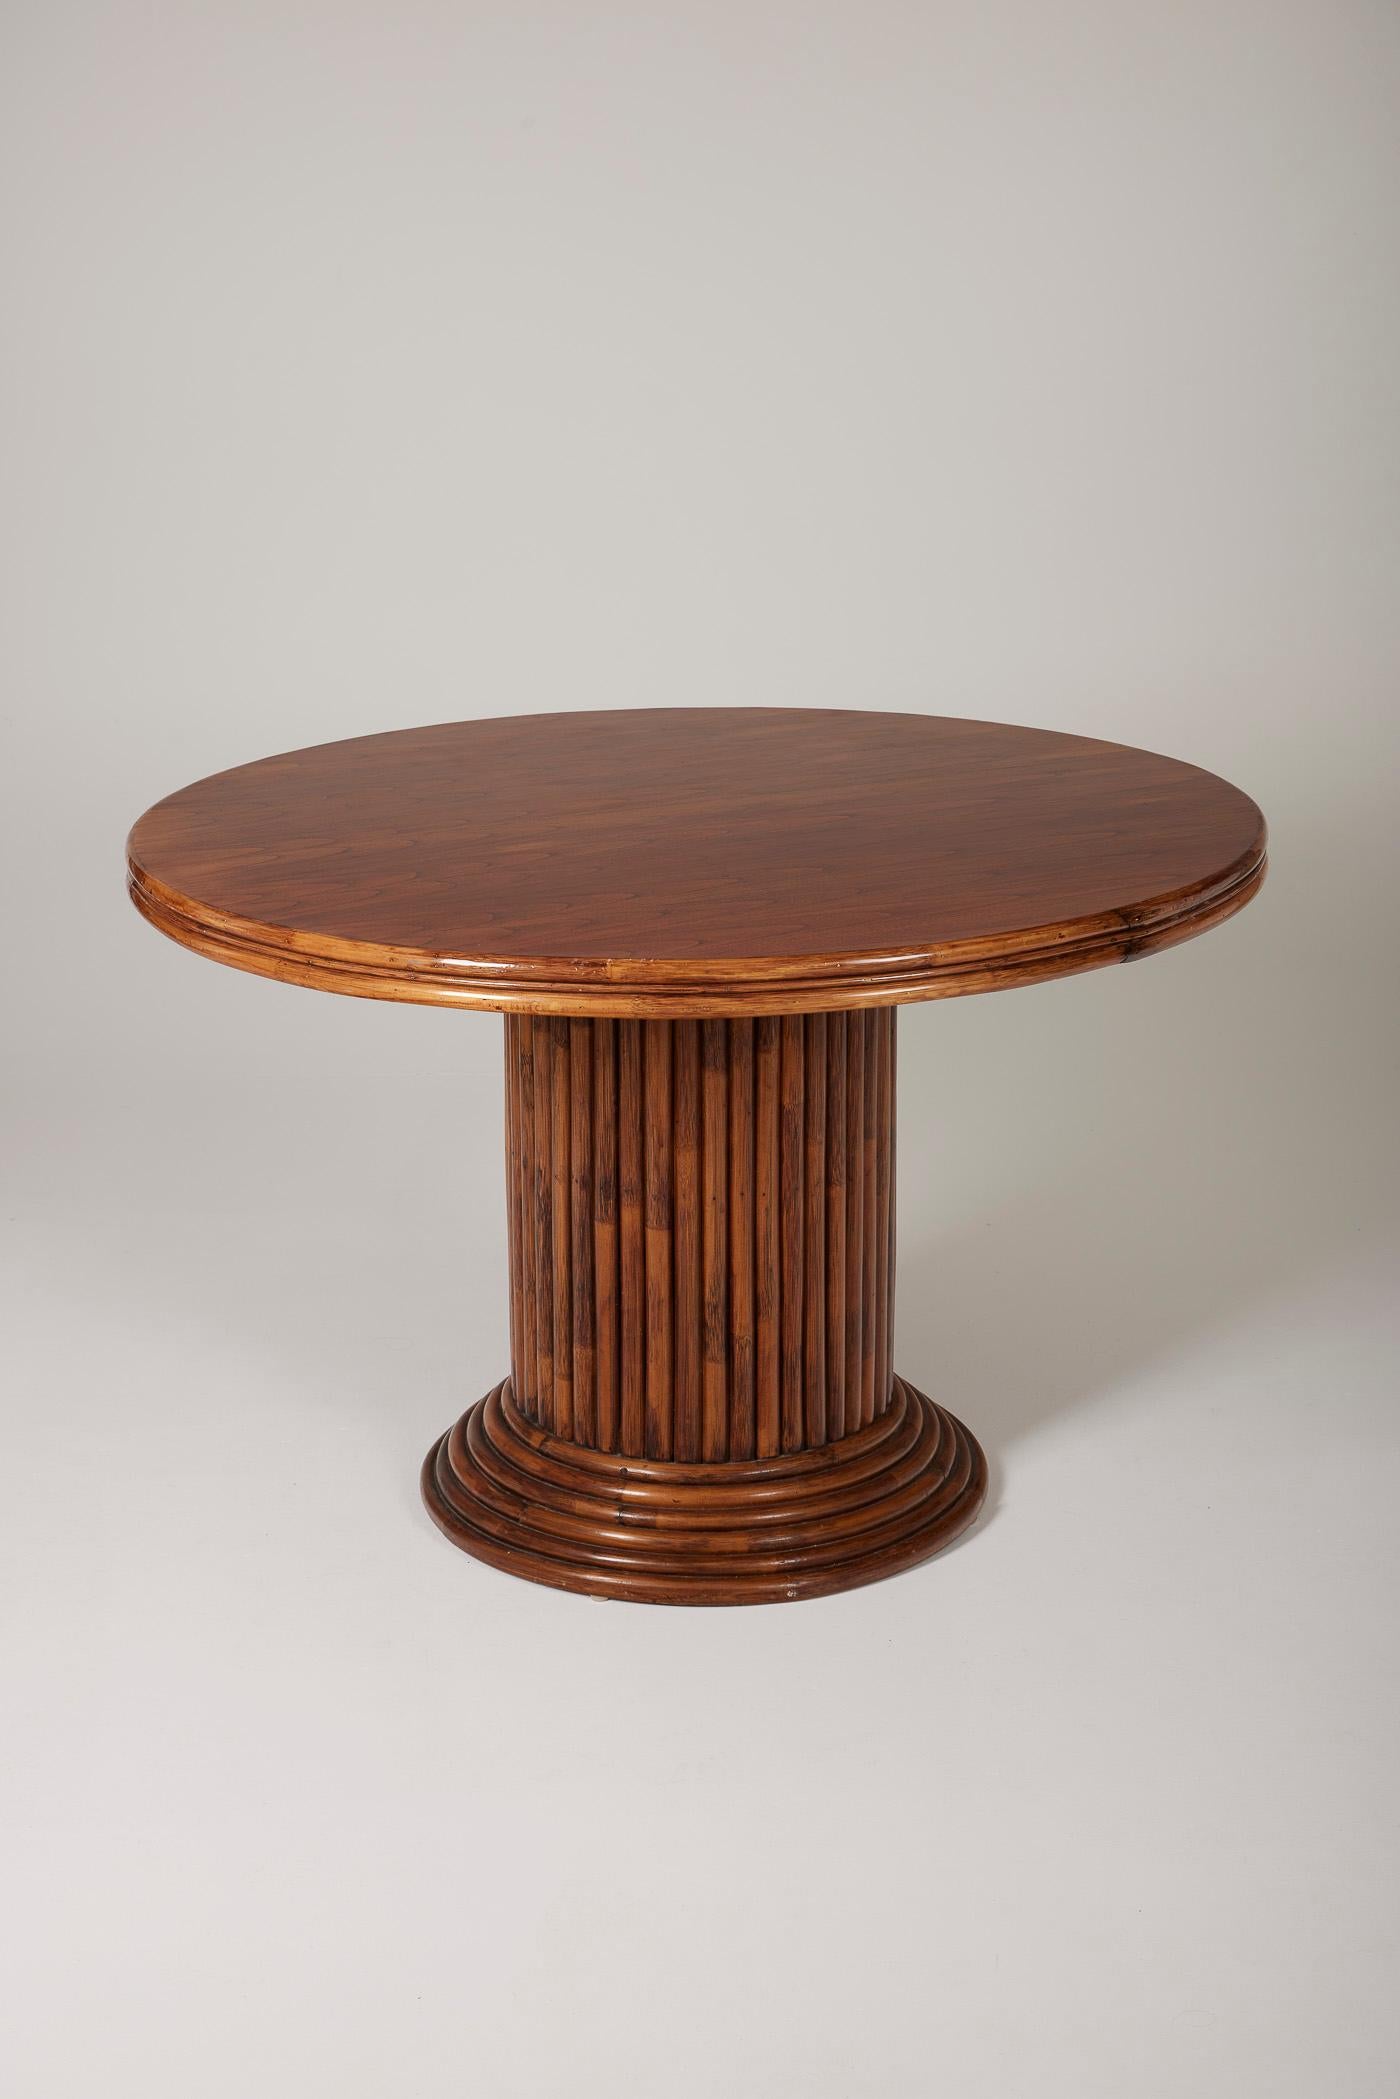 Dining table in the style of the '60s. Round wooden top and cylindrical bamboo base. Very good condition.
LP1697